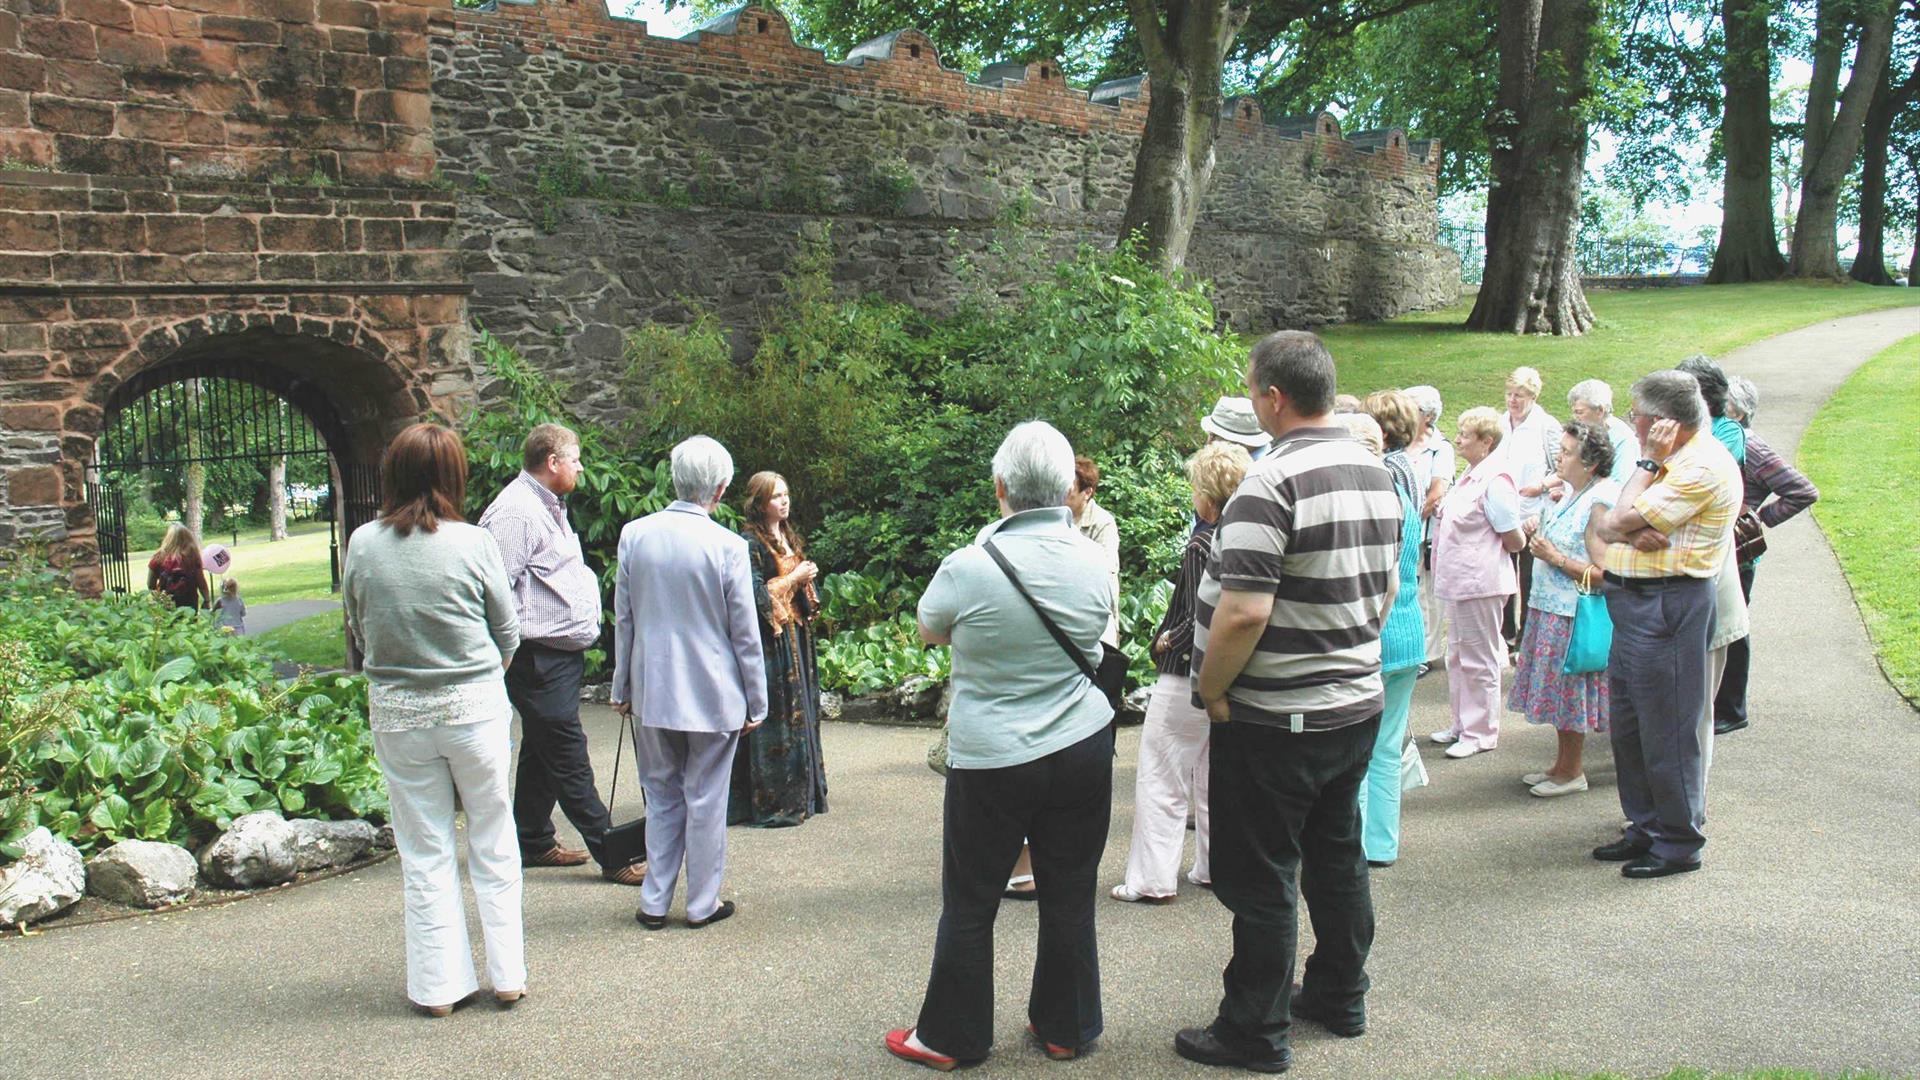 Image is of people on a guided tour of Castle Gardens